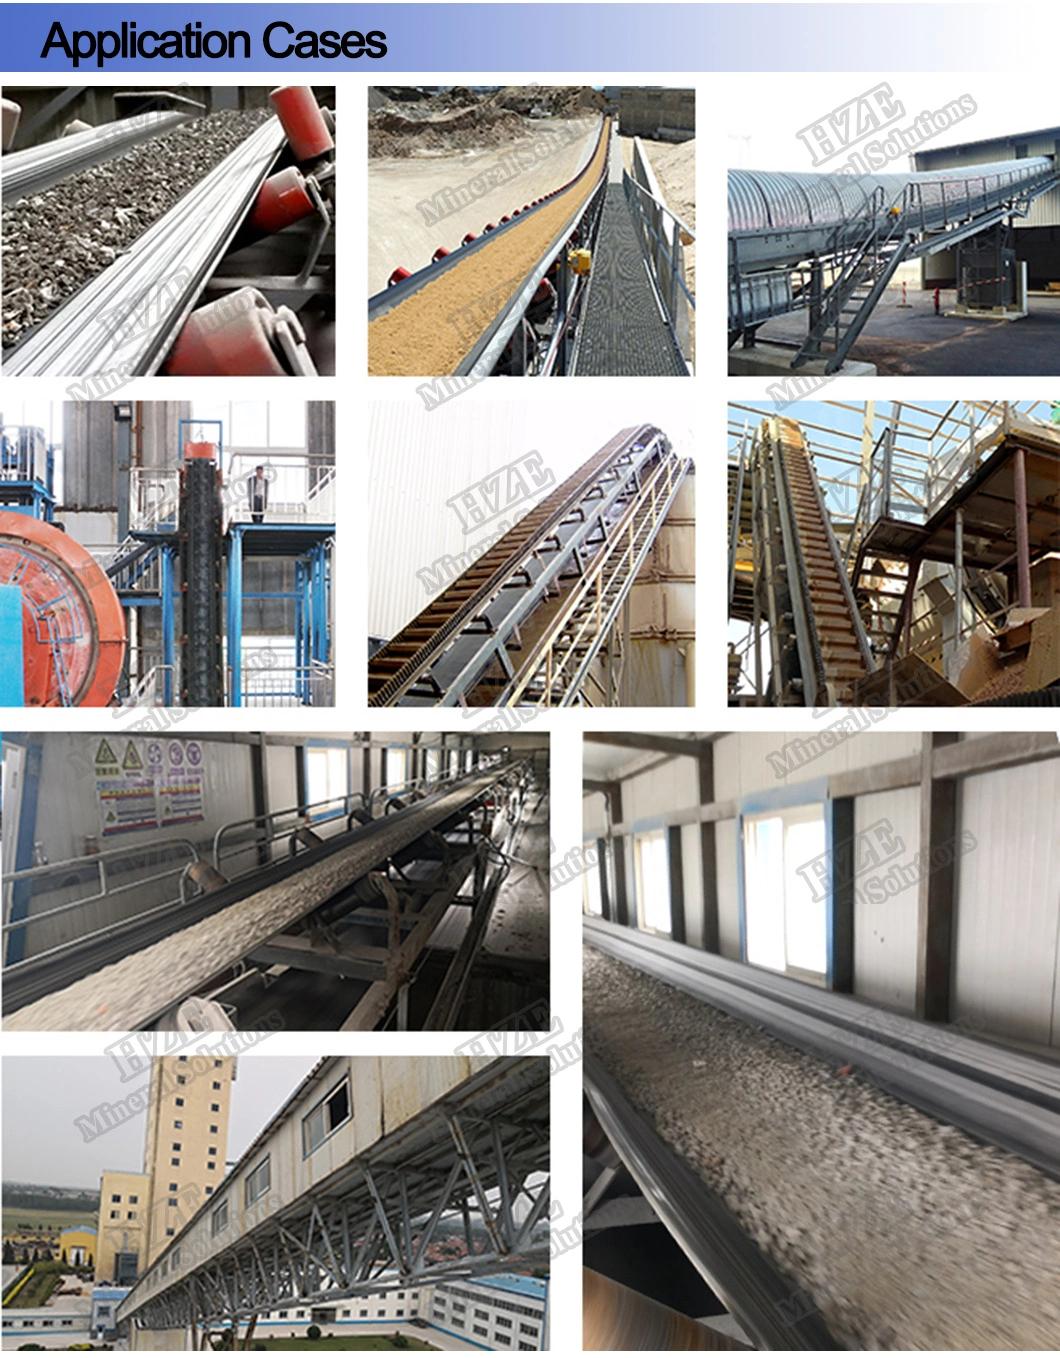 Ore Corrugated Sidewall Belt Conveyor of Mineral Processing Plant